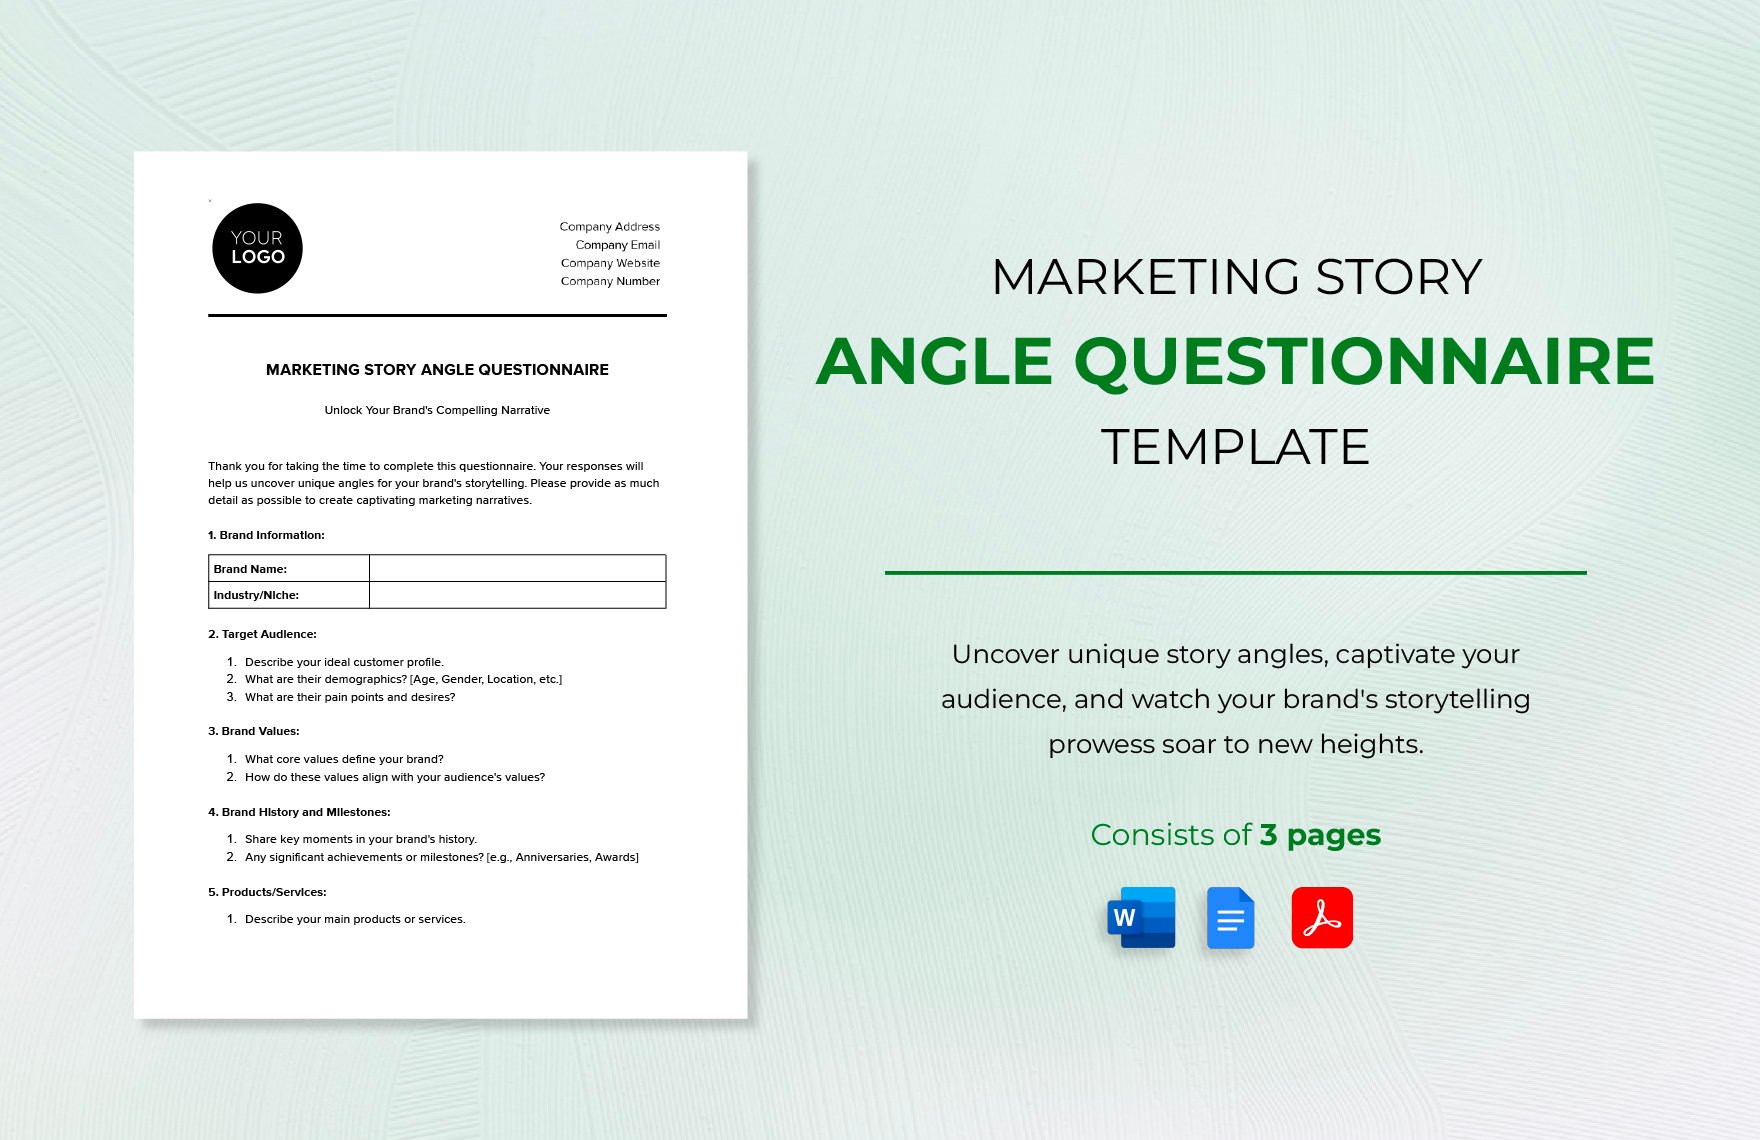 Marketing Story Angle Questionnaire Template in Word, Google Docs, PDF